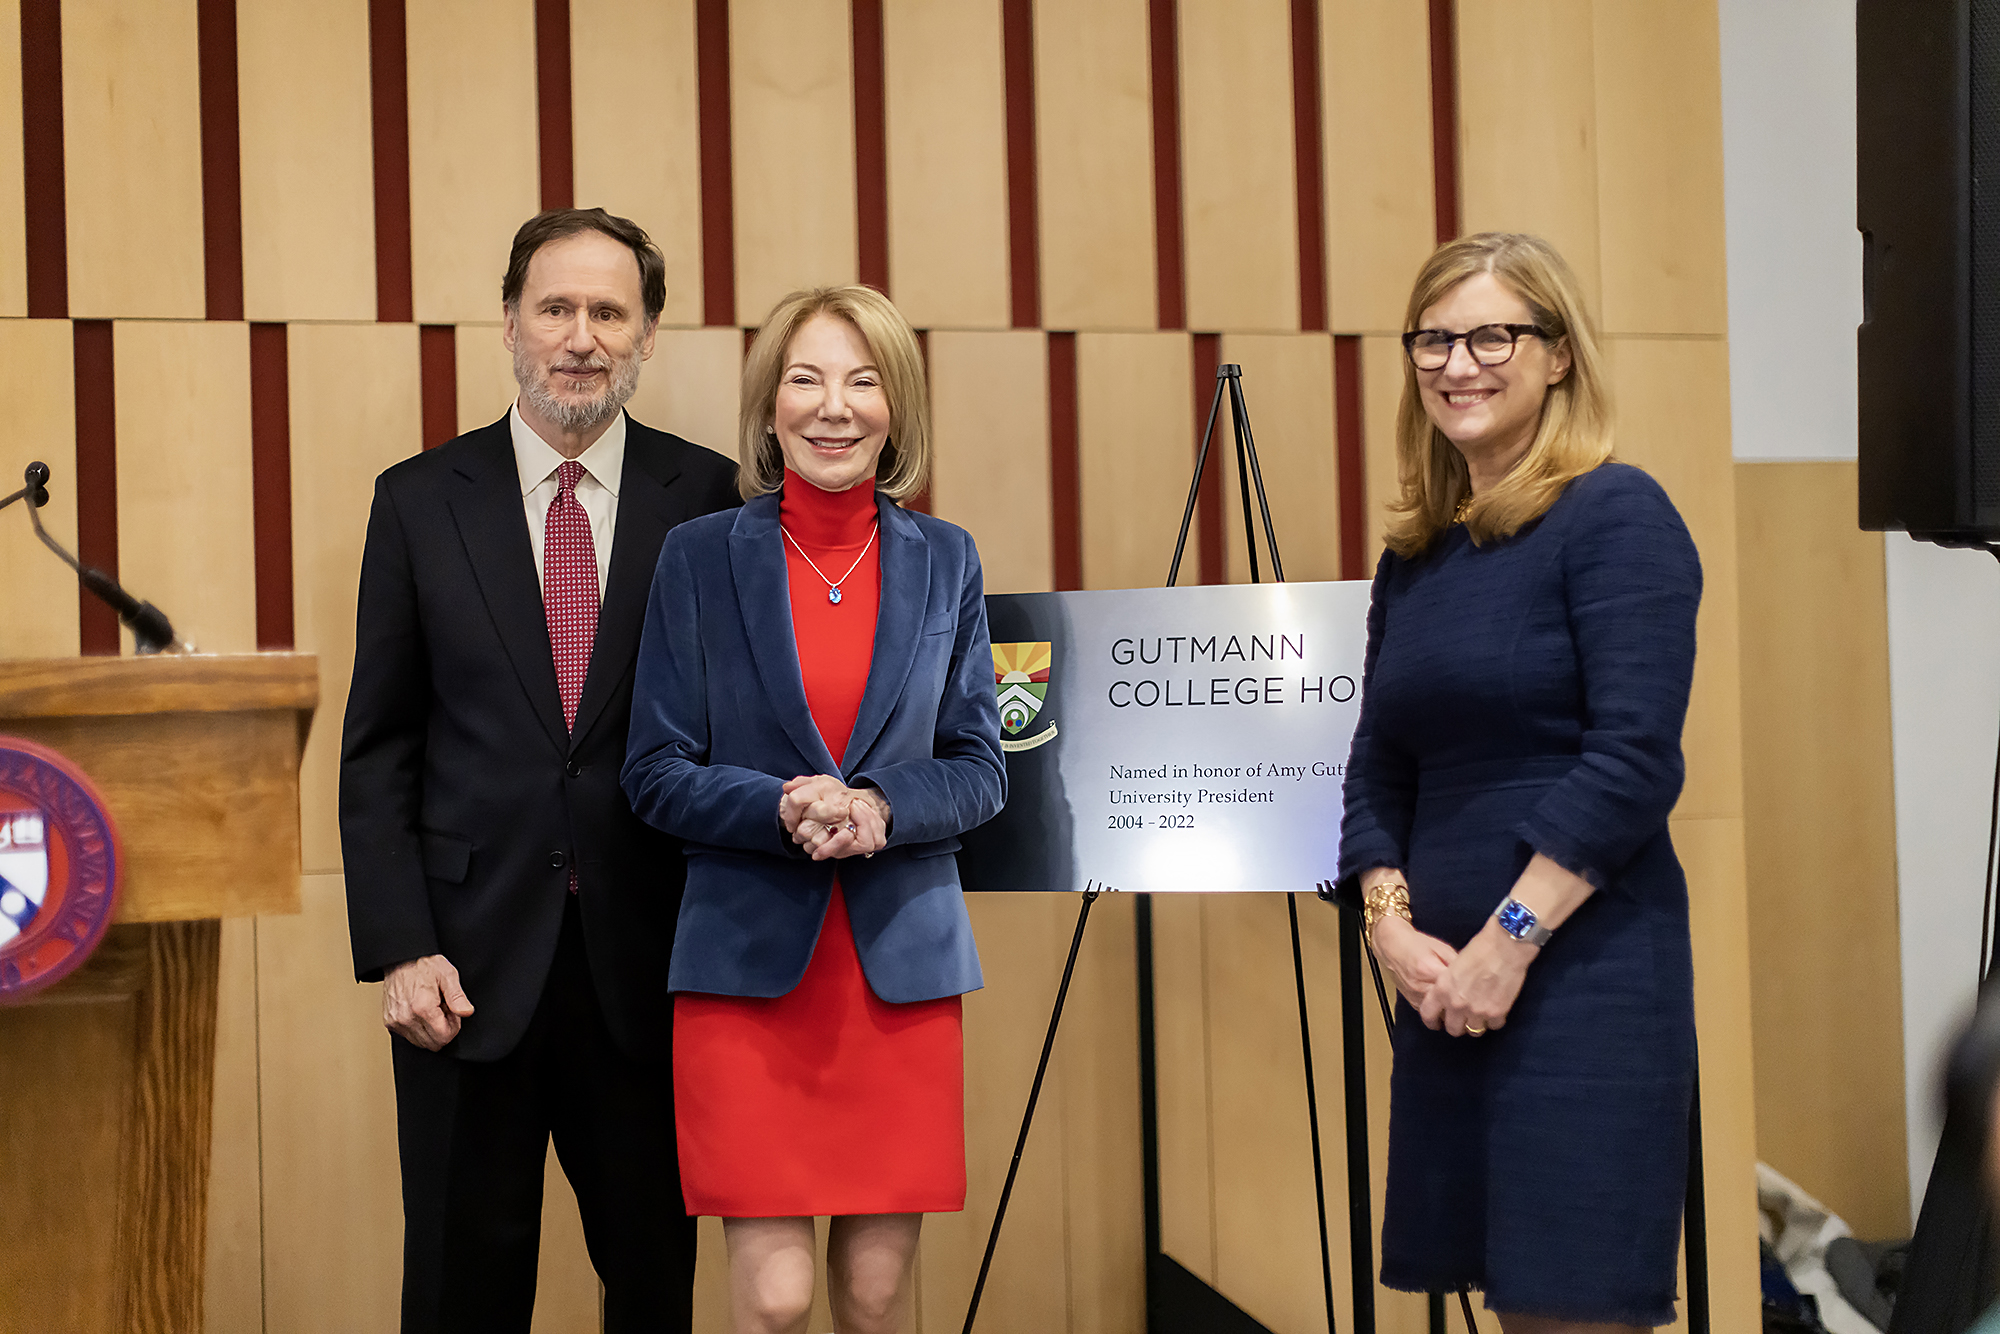 Michael Doyle, Amy Gutmann, and Liz Magill in front of a sign reading Gutmann College House.